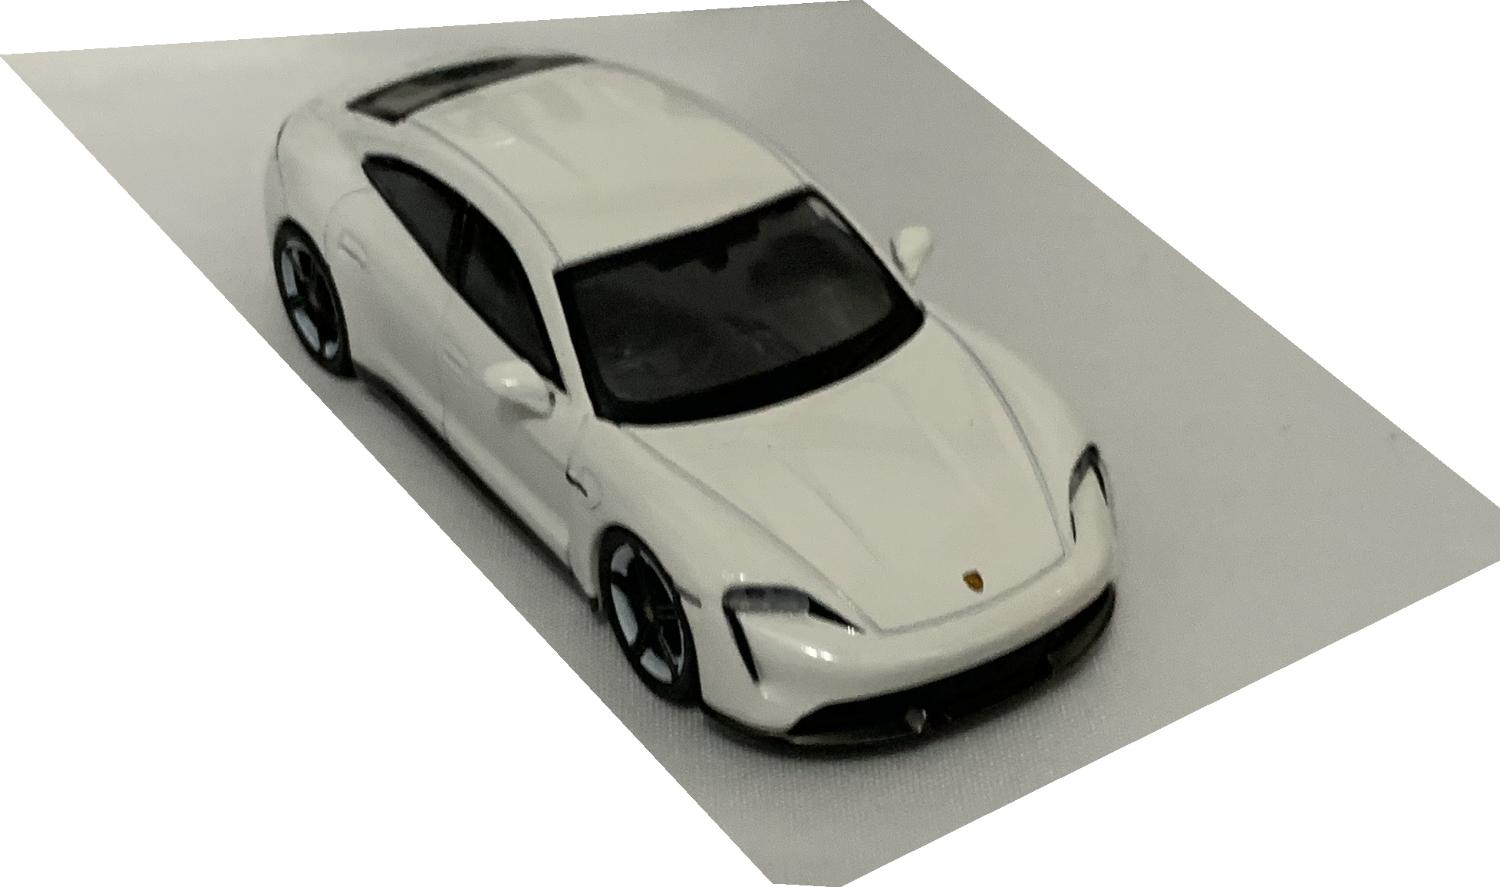 Porsche Taycan Turbo S with detail throughout, all authentically recreated.  The model is presented in a box, the car is approx. 8 cm long and the box is 10 cm long